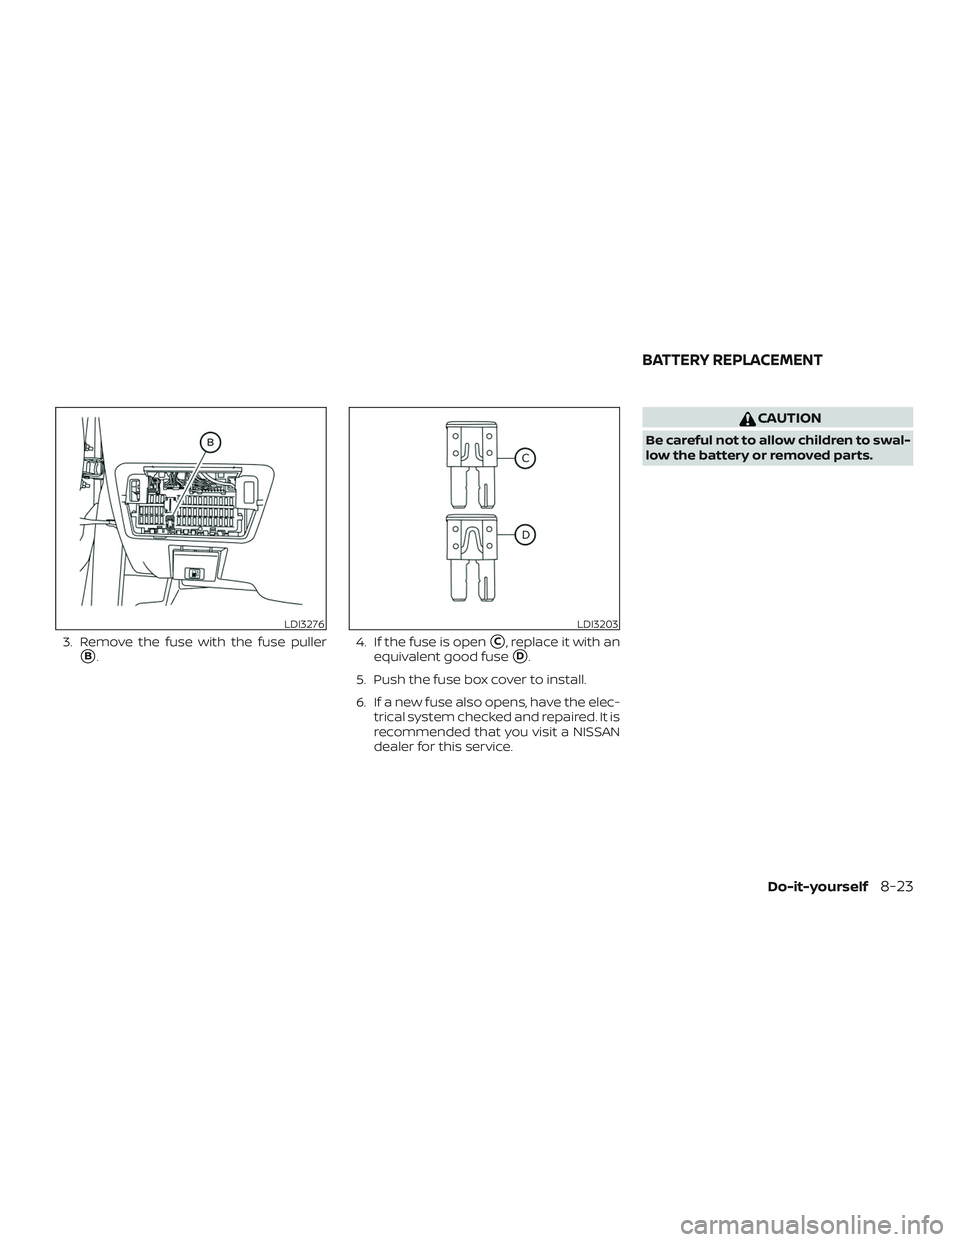 NISSAN ALTIMA 2020  Owner´s Manual 3. Remove the fuse with the fuse puller
B.4. If the fuse is openC, replace it with an
equivalent good fuse
D.
5. Push the fuse box cover to install.
6. If a new fuse also opens, have the elec- tric